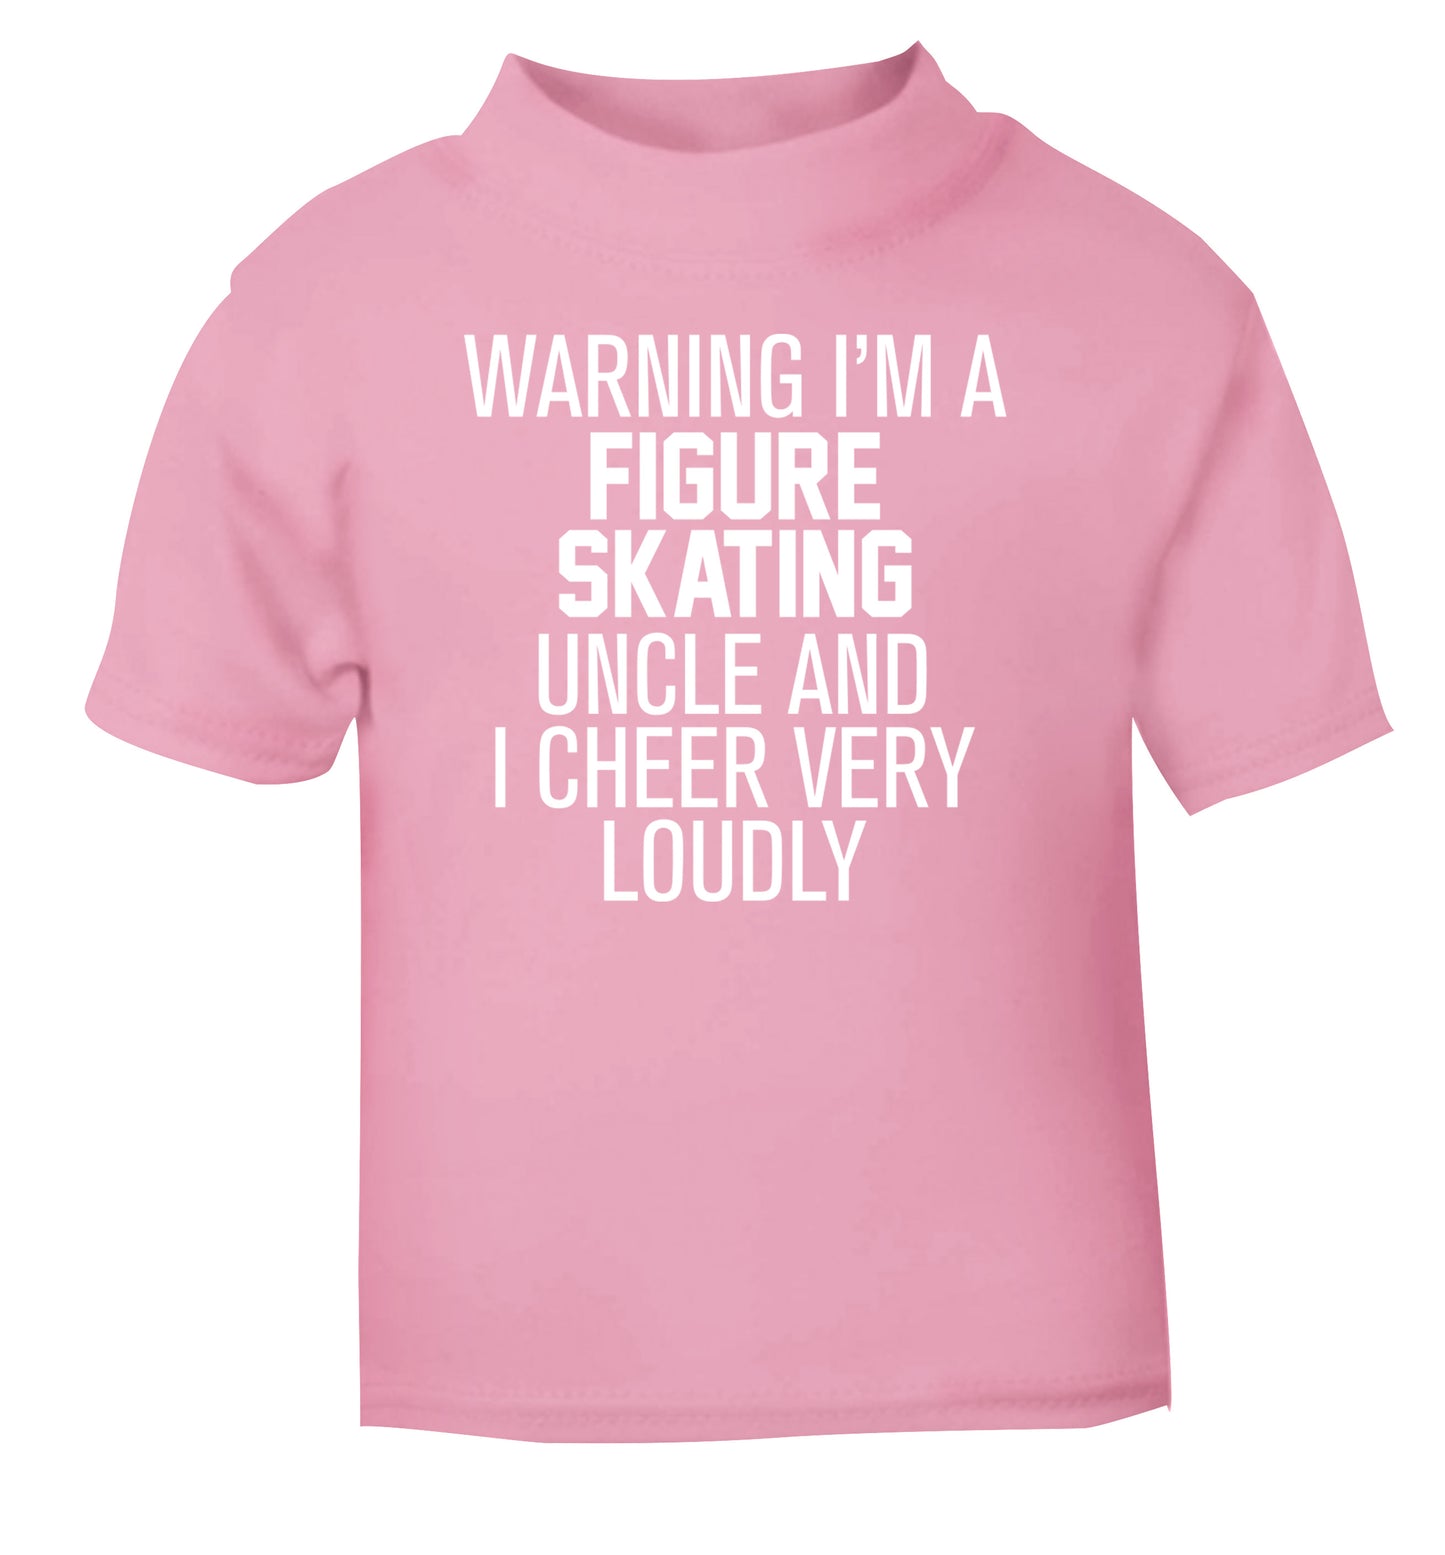 Warning I'm a figure skating uncle and I cheer very loudly light pink Baby Toddler Tshirt 2 Years